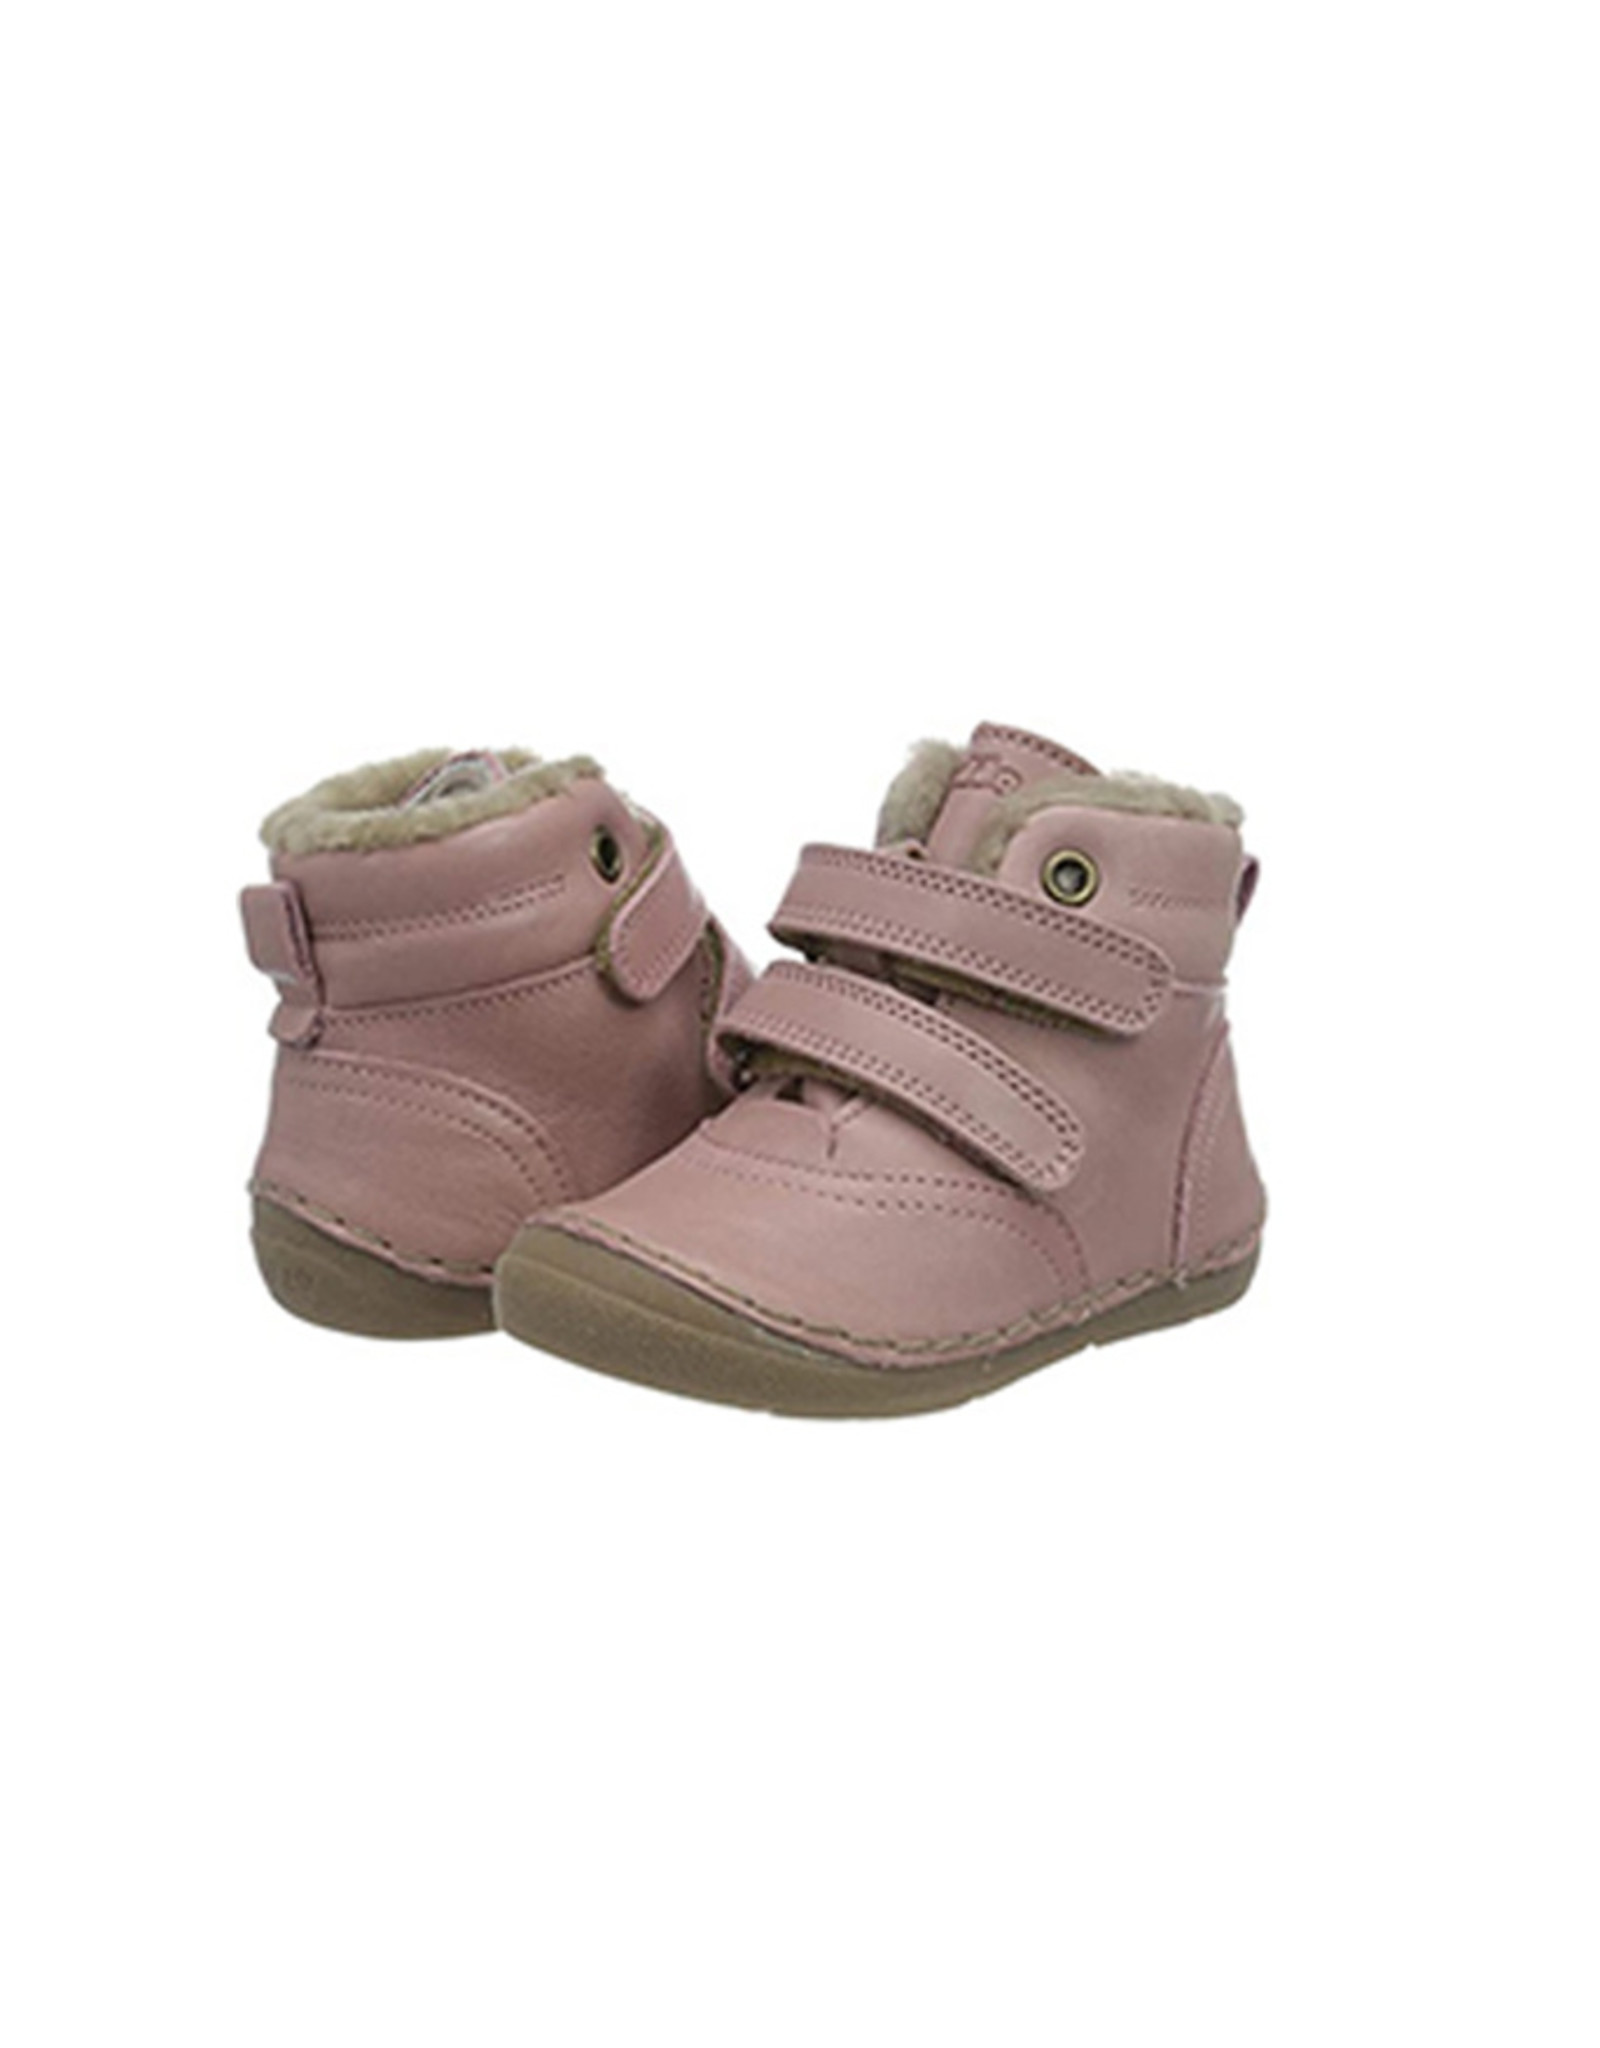 pink velcro shoes